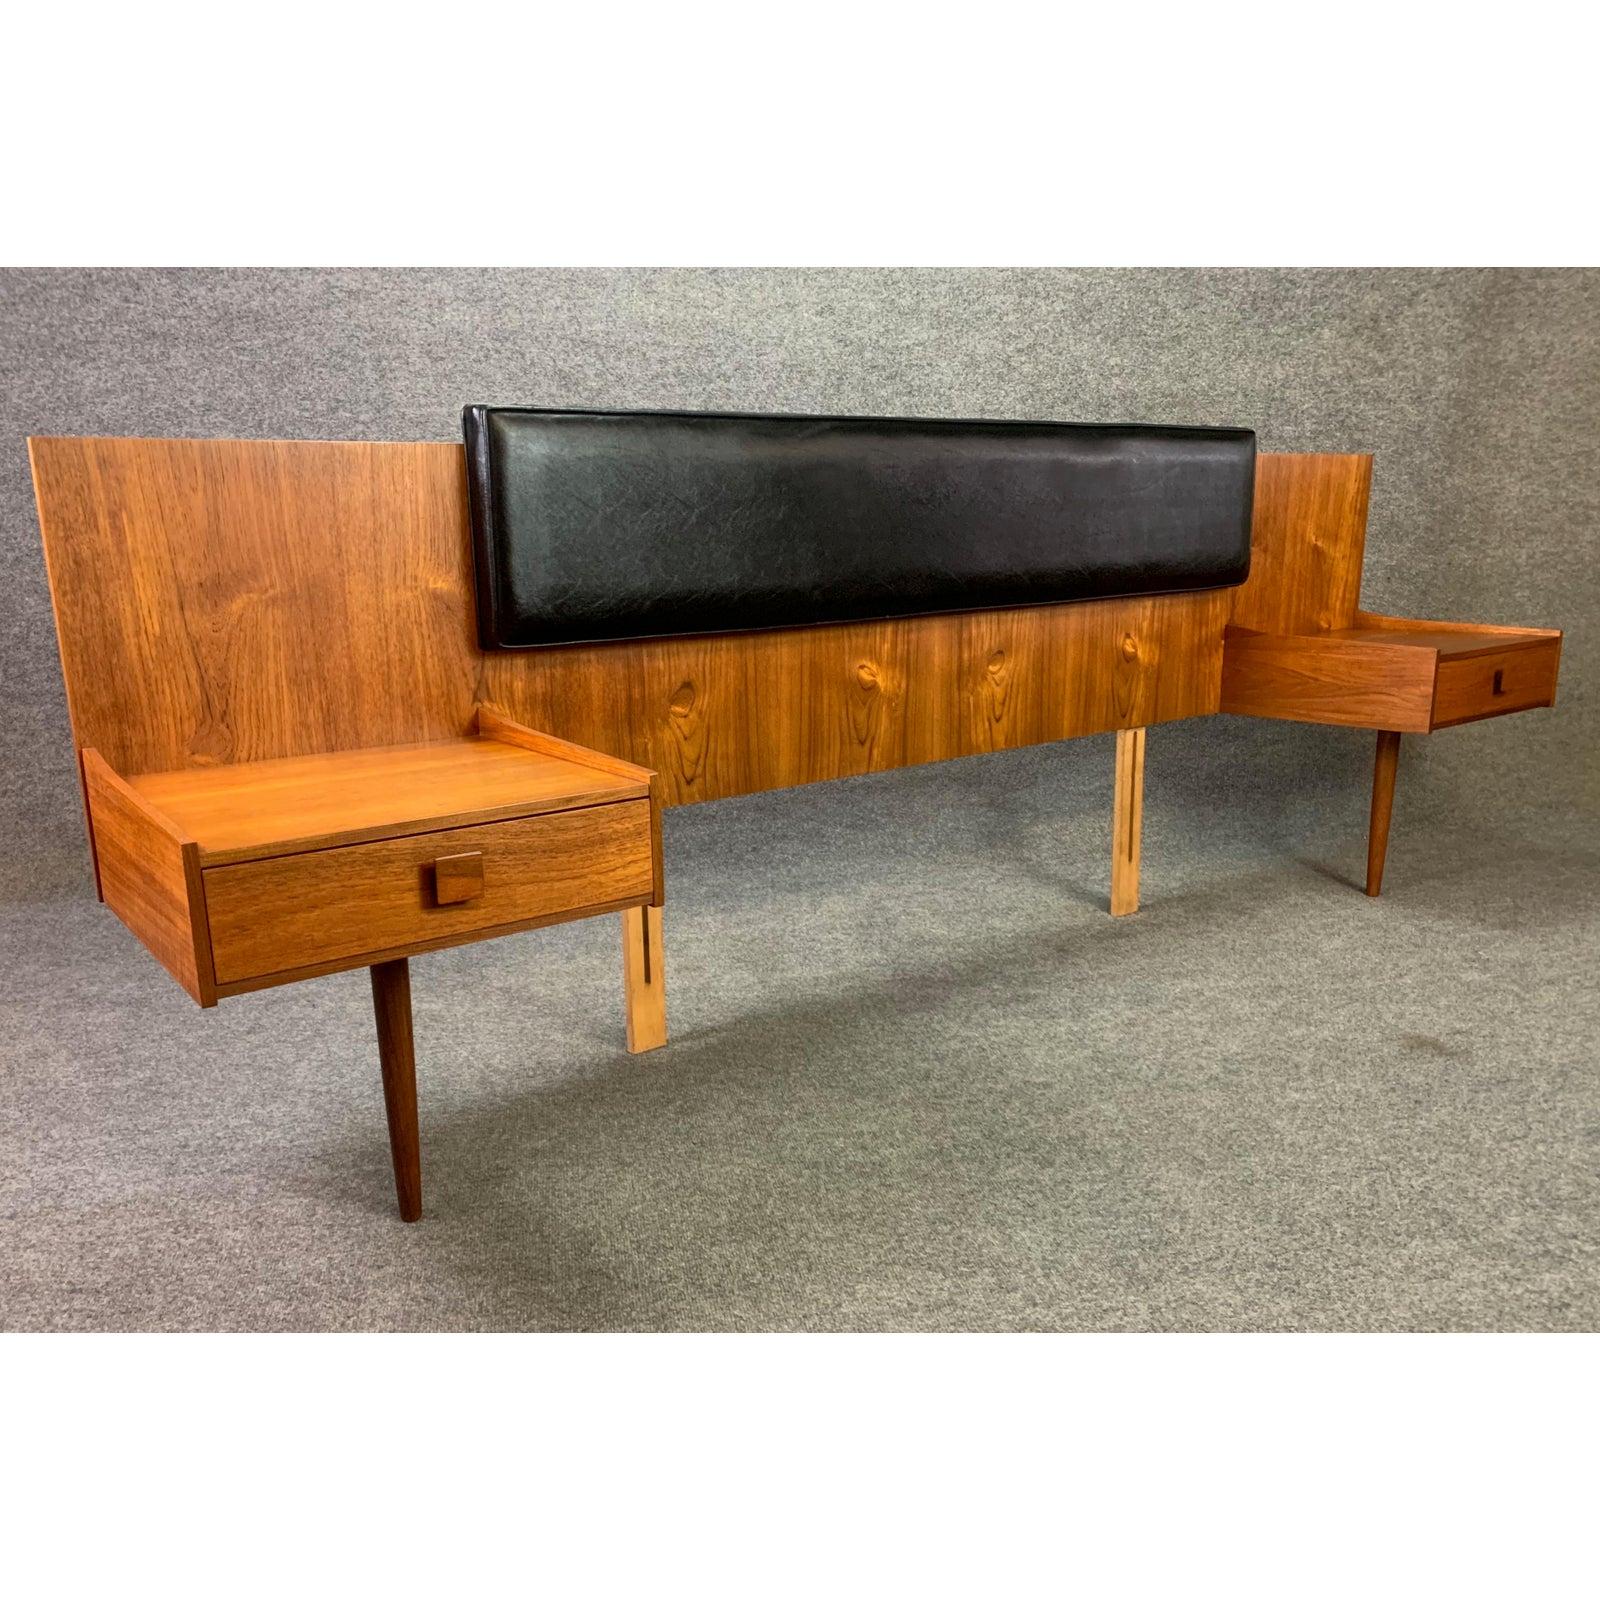 Here is a beautiful British Mid-Century Modern headboard and its pair of floating nightstands in teak designed by Ib Kofod Larsen for the Danish Design collection of G Plan manufactured in UK in the 1960's.
This special piece, recently imported